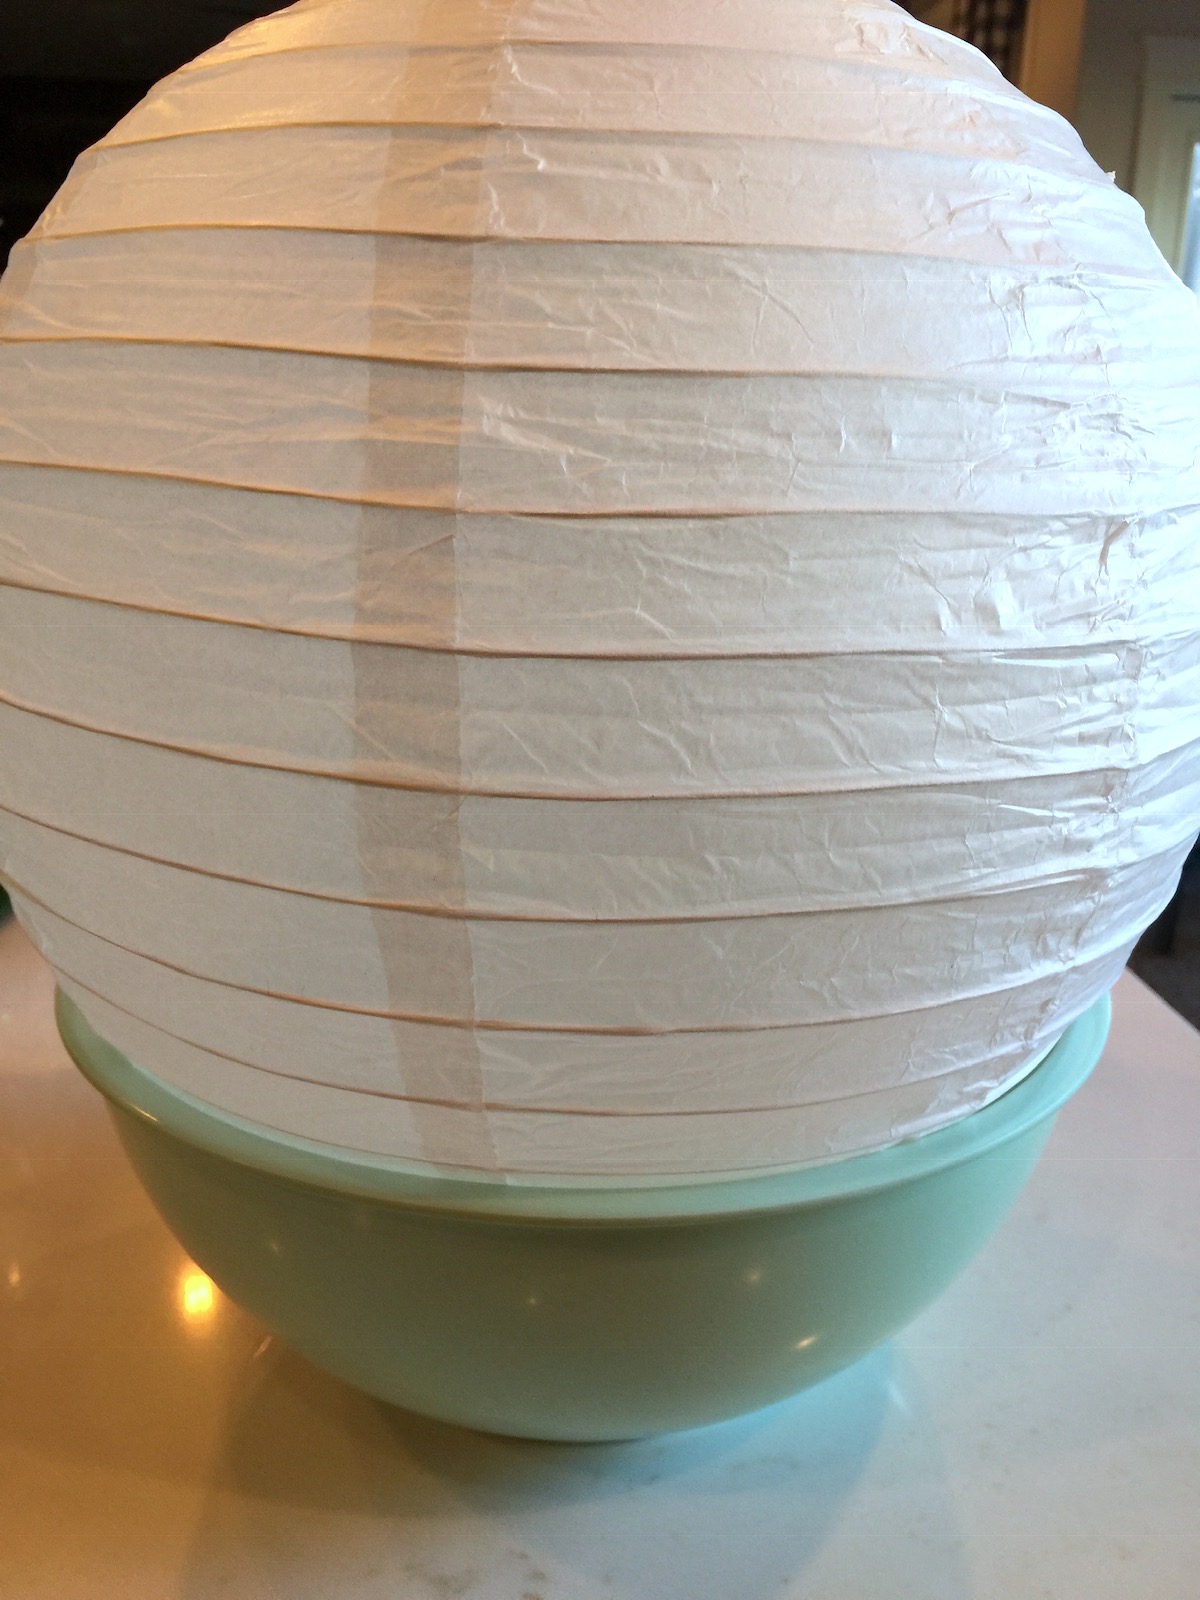 Paper lantern expanded and sitting in a bowl